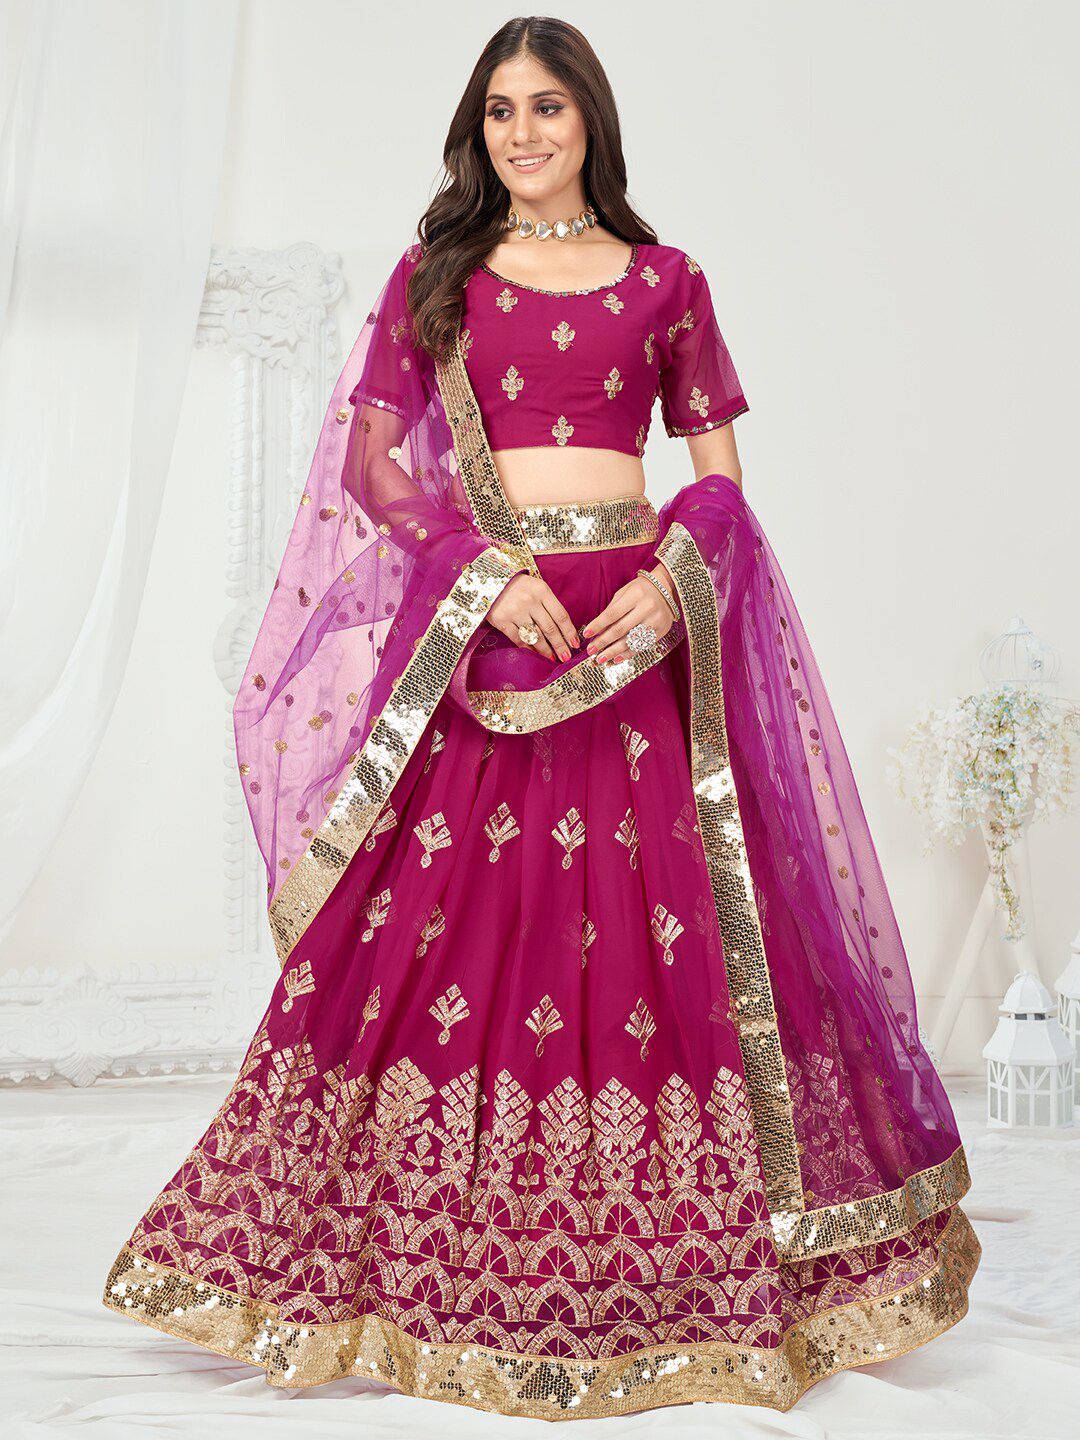 WHITE FIRE Pink & Golden Embellished Sequinned Semi-Stitched Lehenga Choli Set Price in India